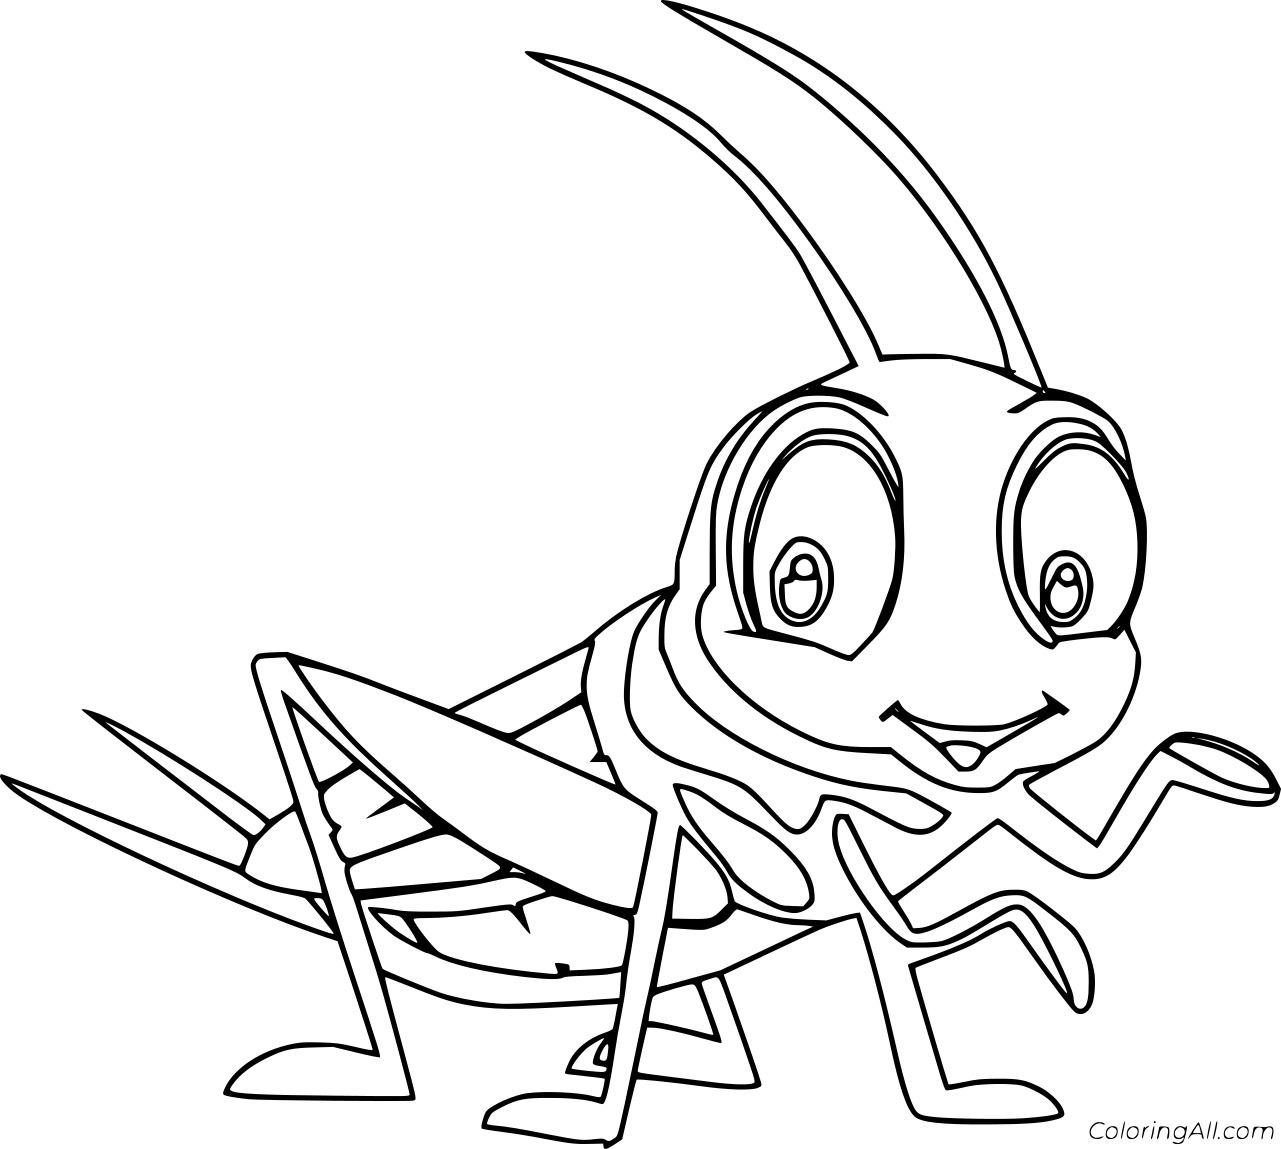 Cartoon Cute Grasshopper Free Coloring Page